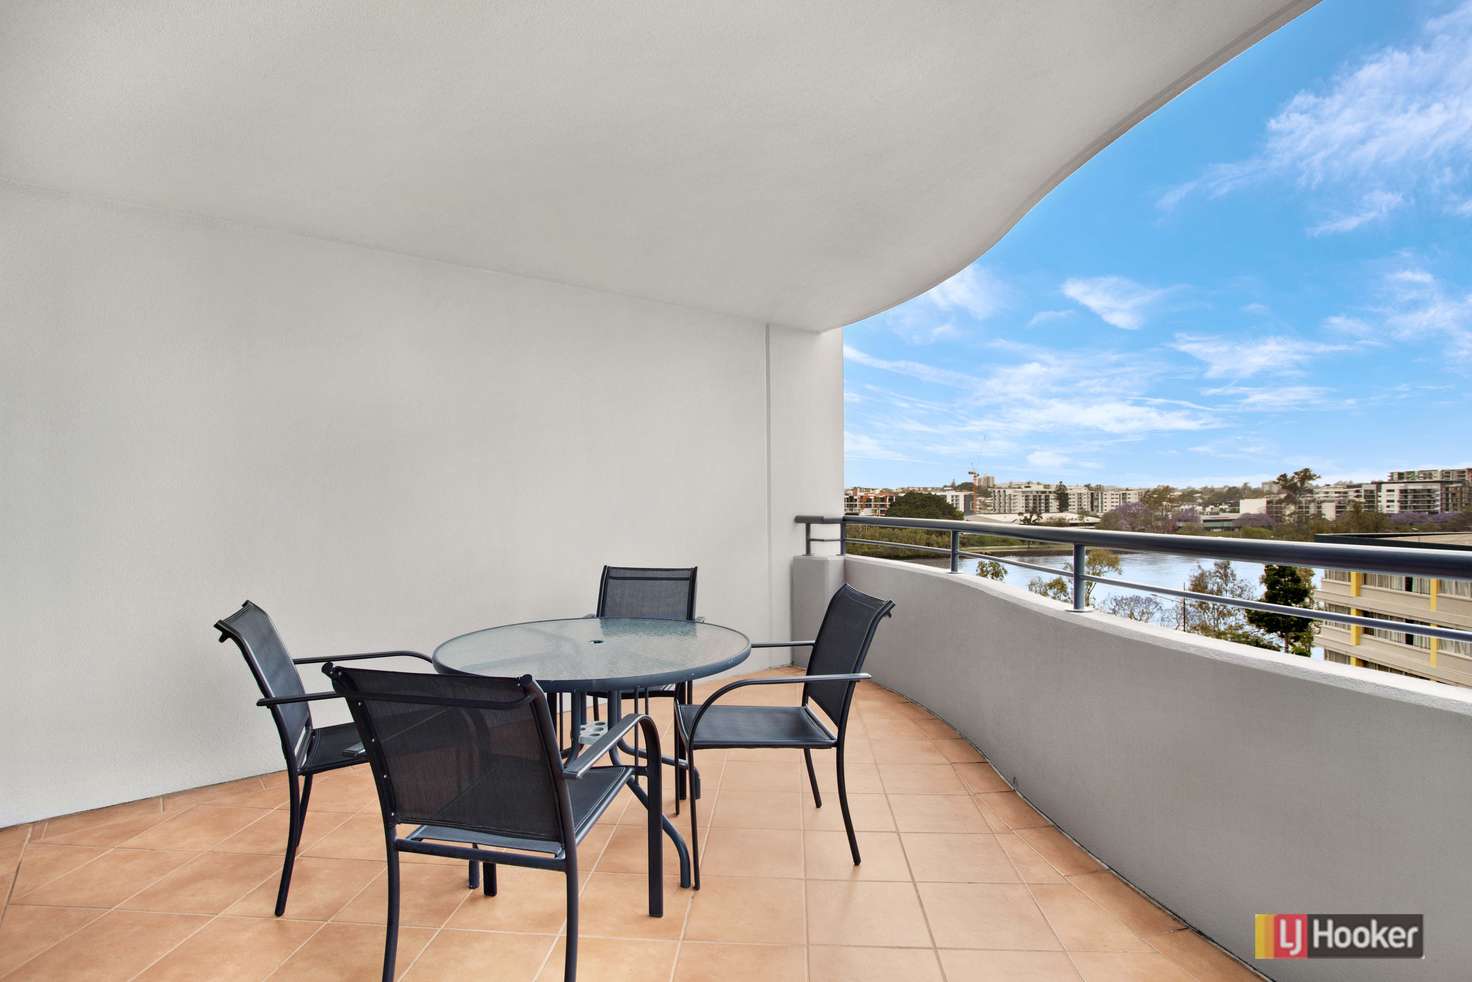 Main view of Homely apartment listing, 31/9 Chasely Street, Auchenflower QLD 4066